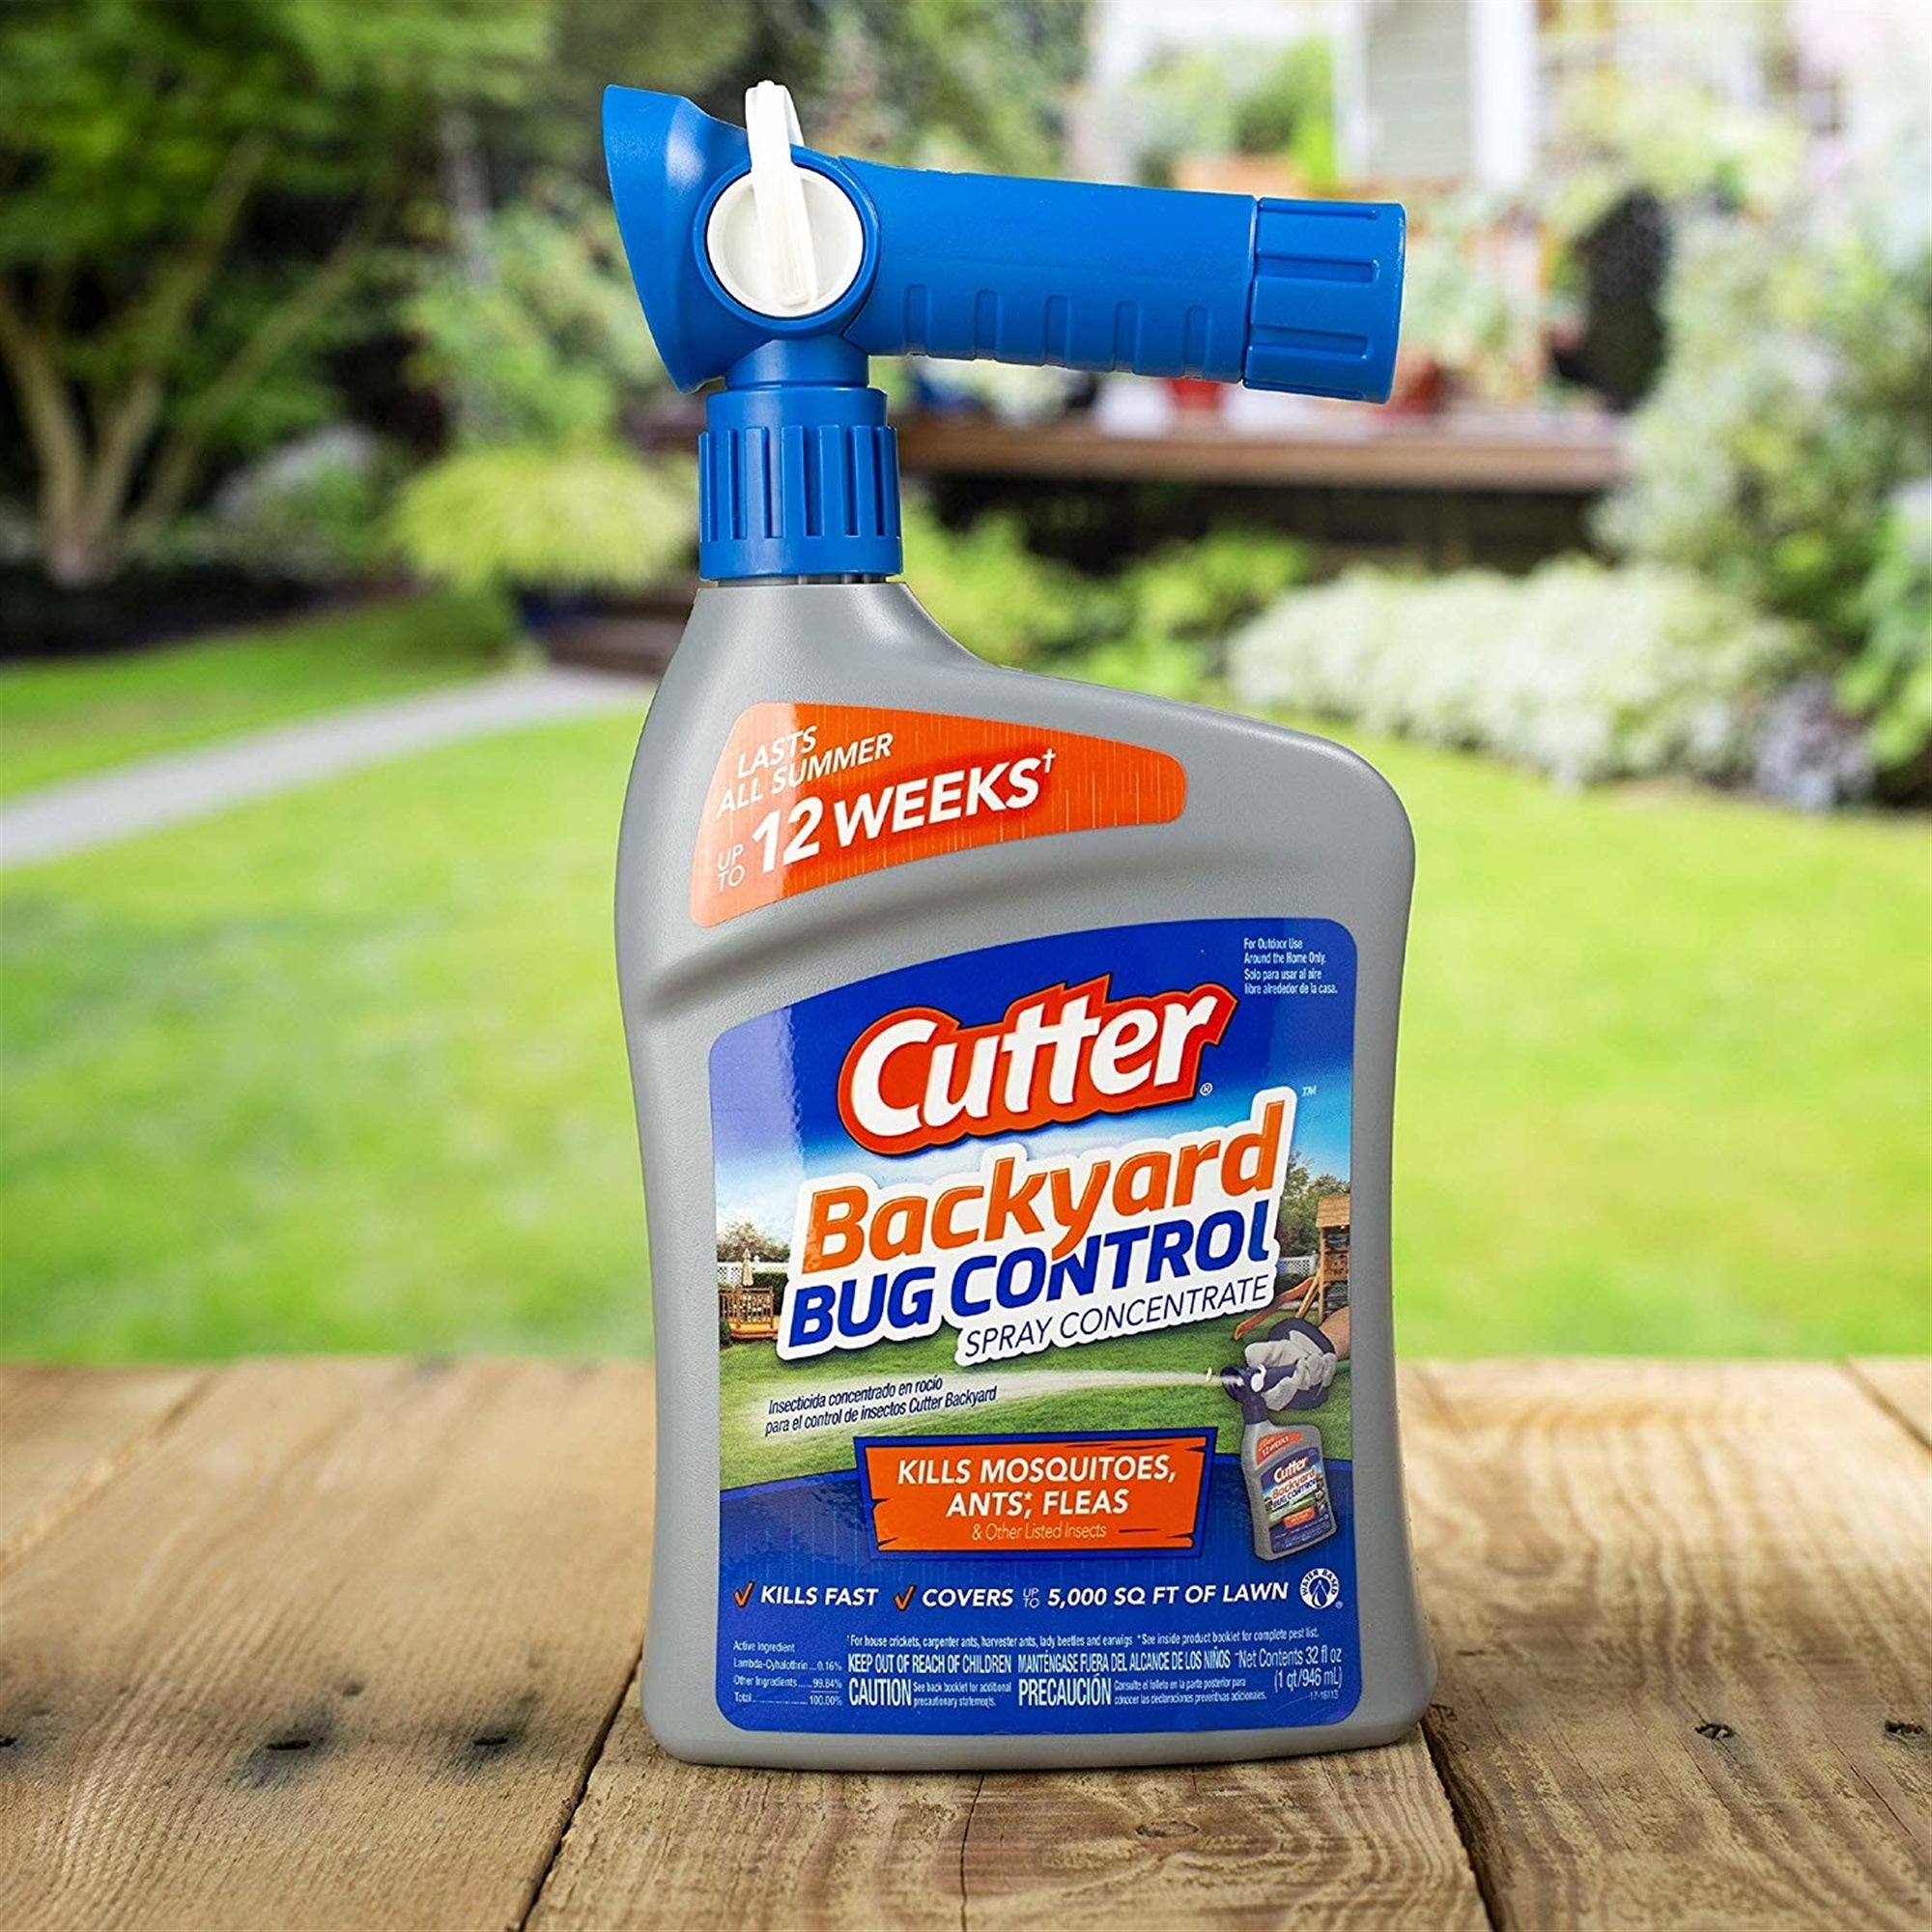 Cutter Backyard Bug Control Spray Concentrate, 5M Sq Ft Coverage